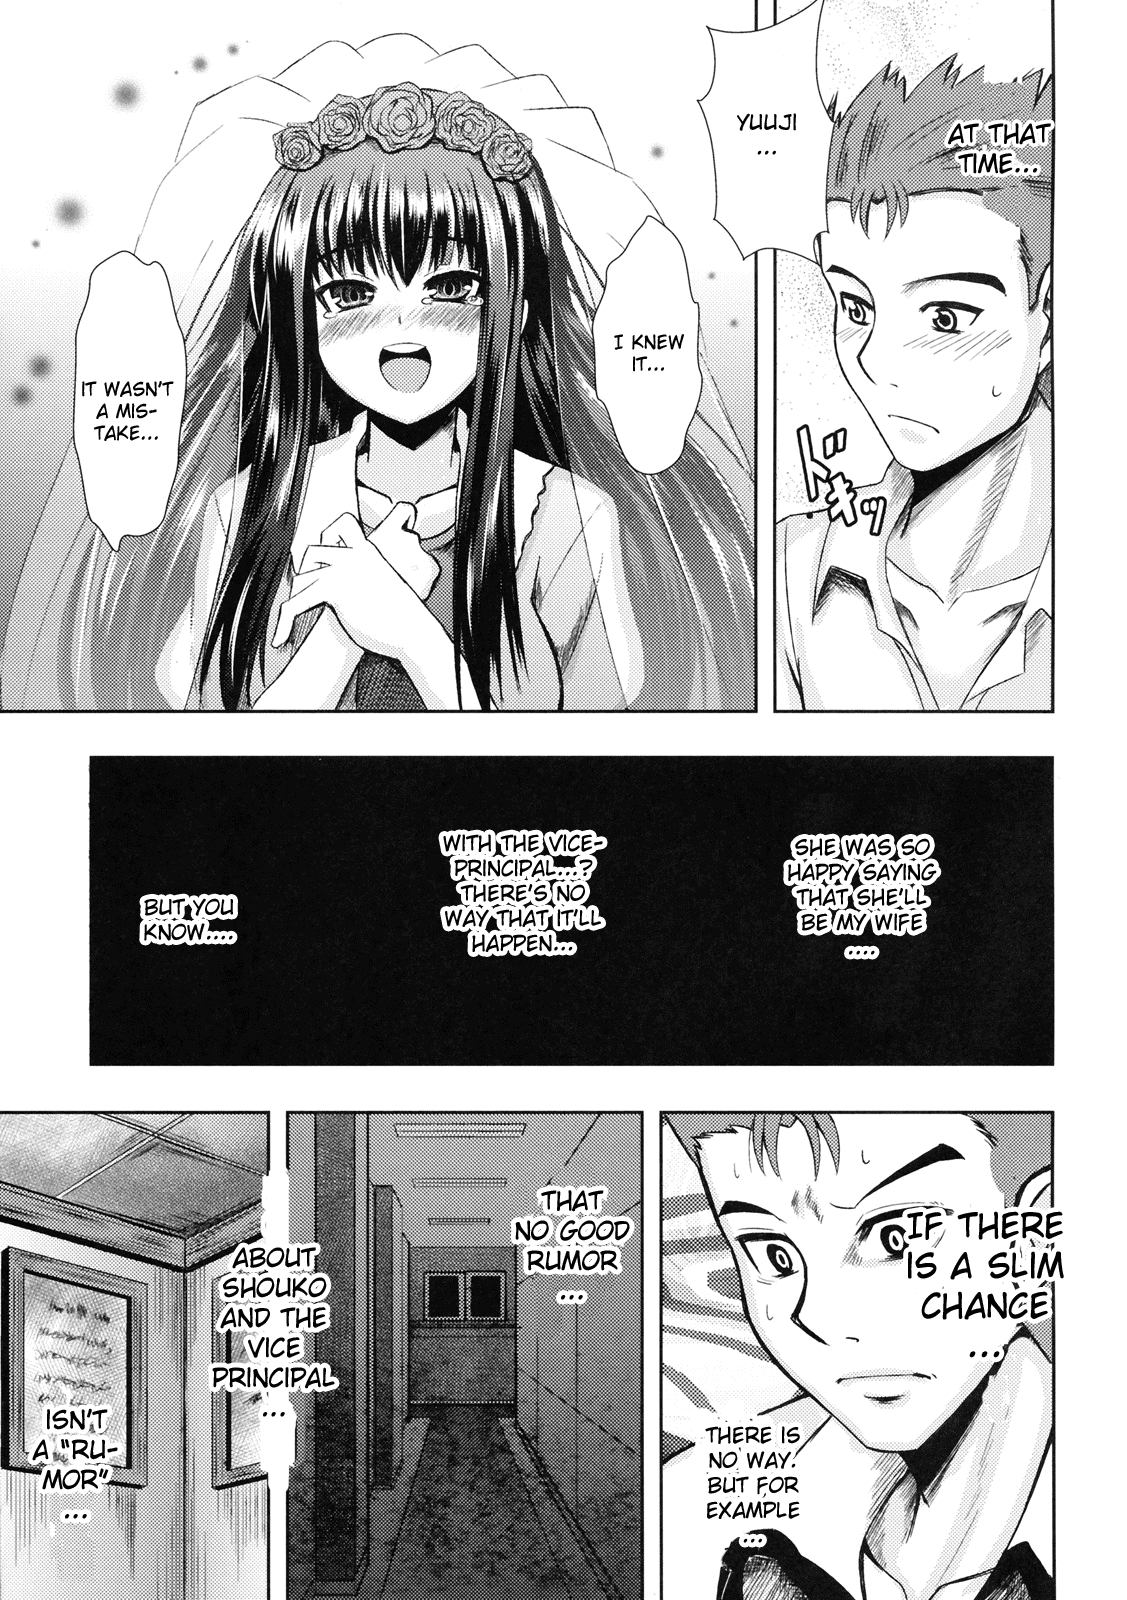 (COMIC1☆4) [PTD (Tatsuhiko)] Iron finger from hell (Baka to Test to Shoukanju) [English] [One of a Kind Productions] 5